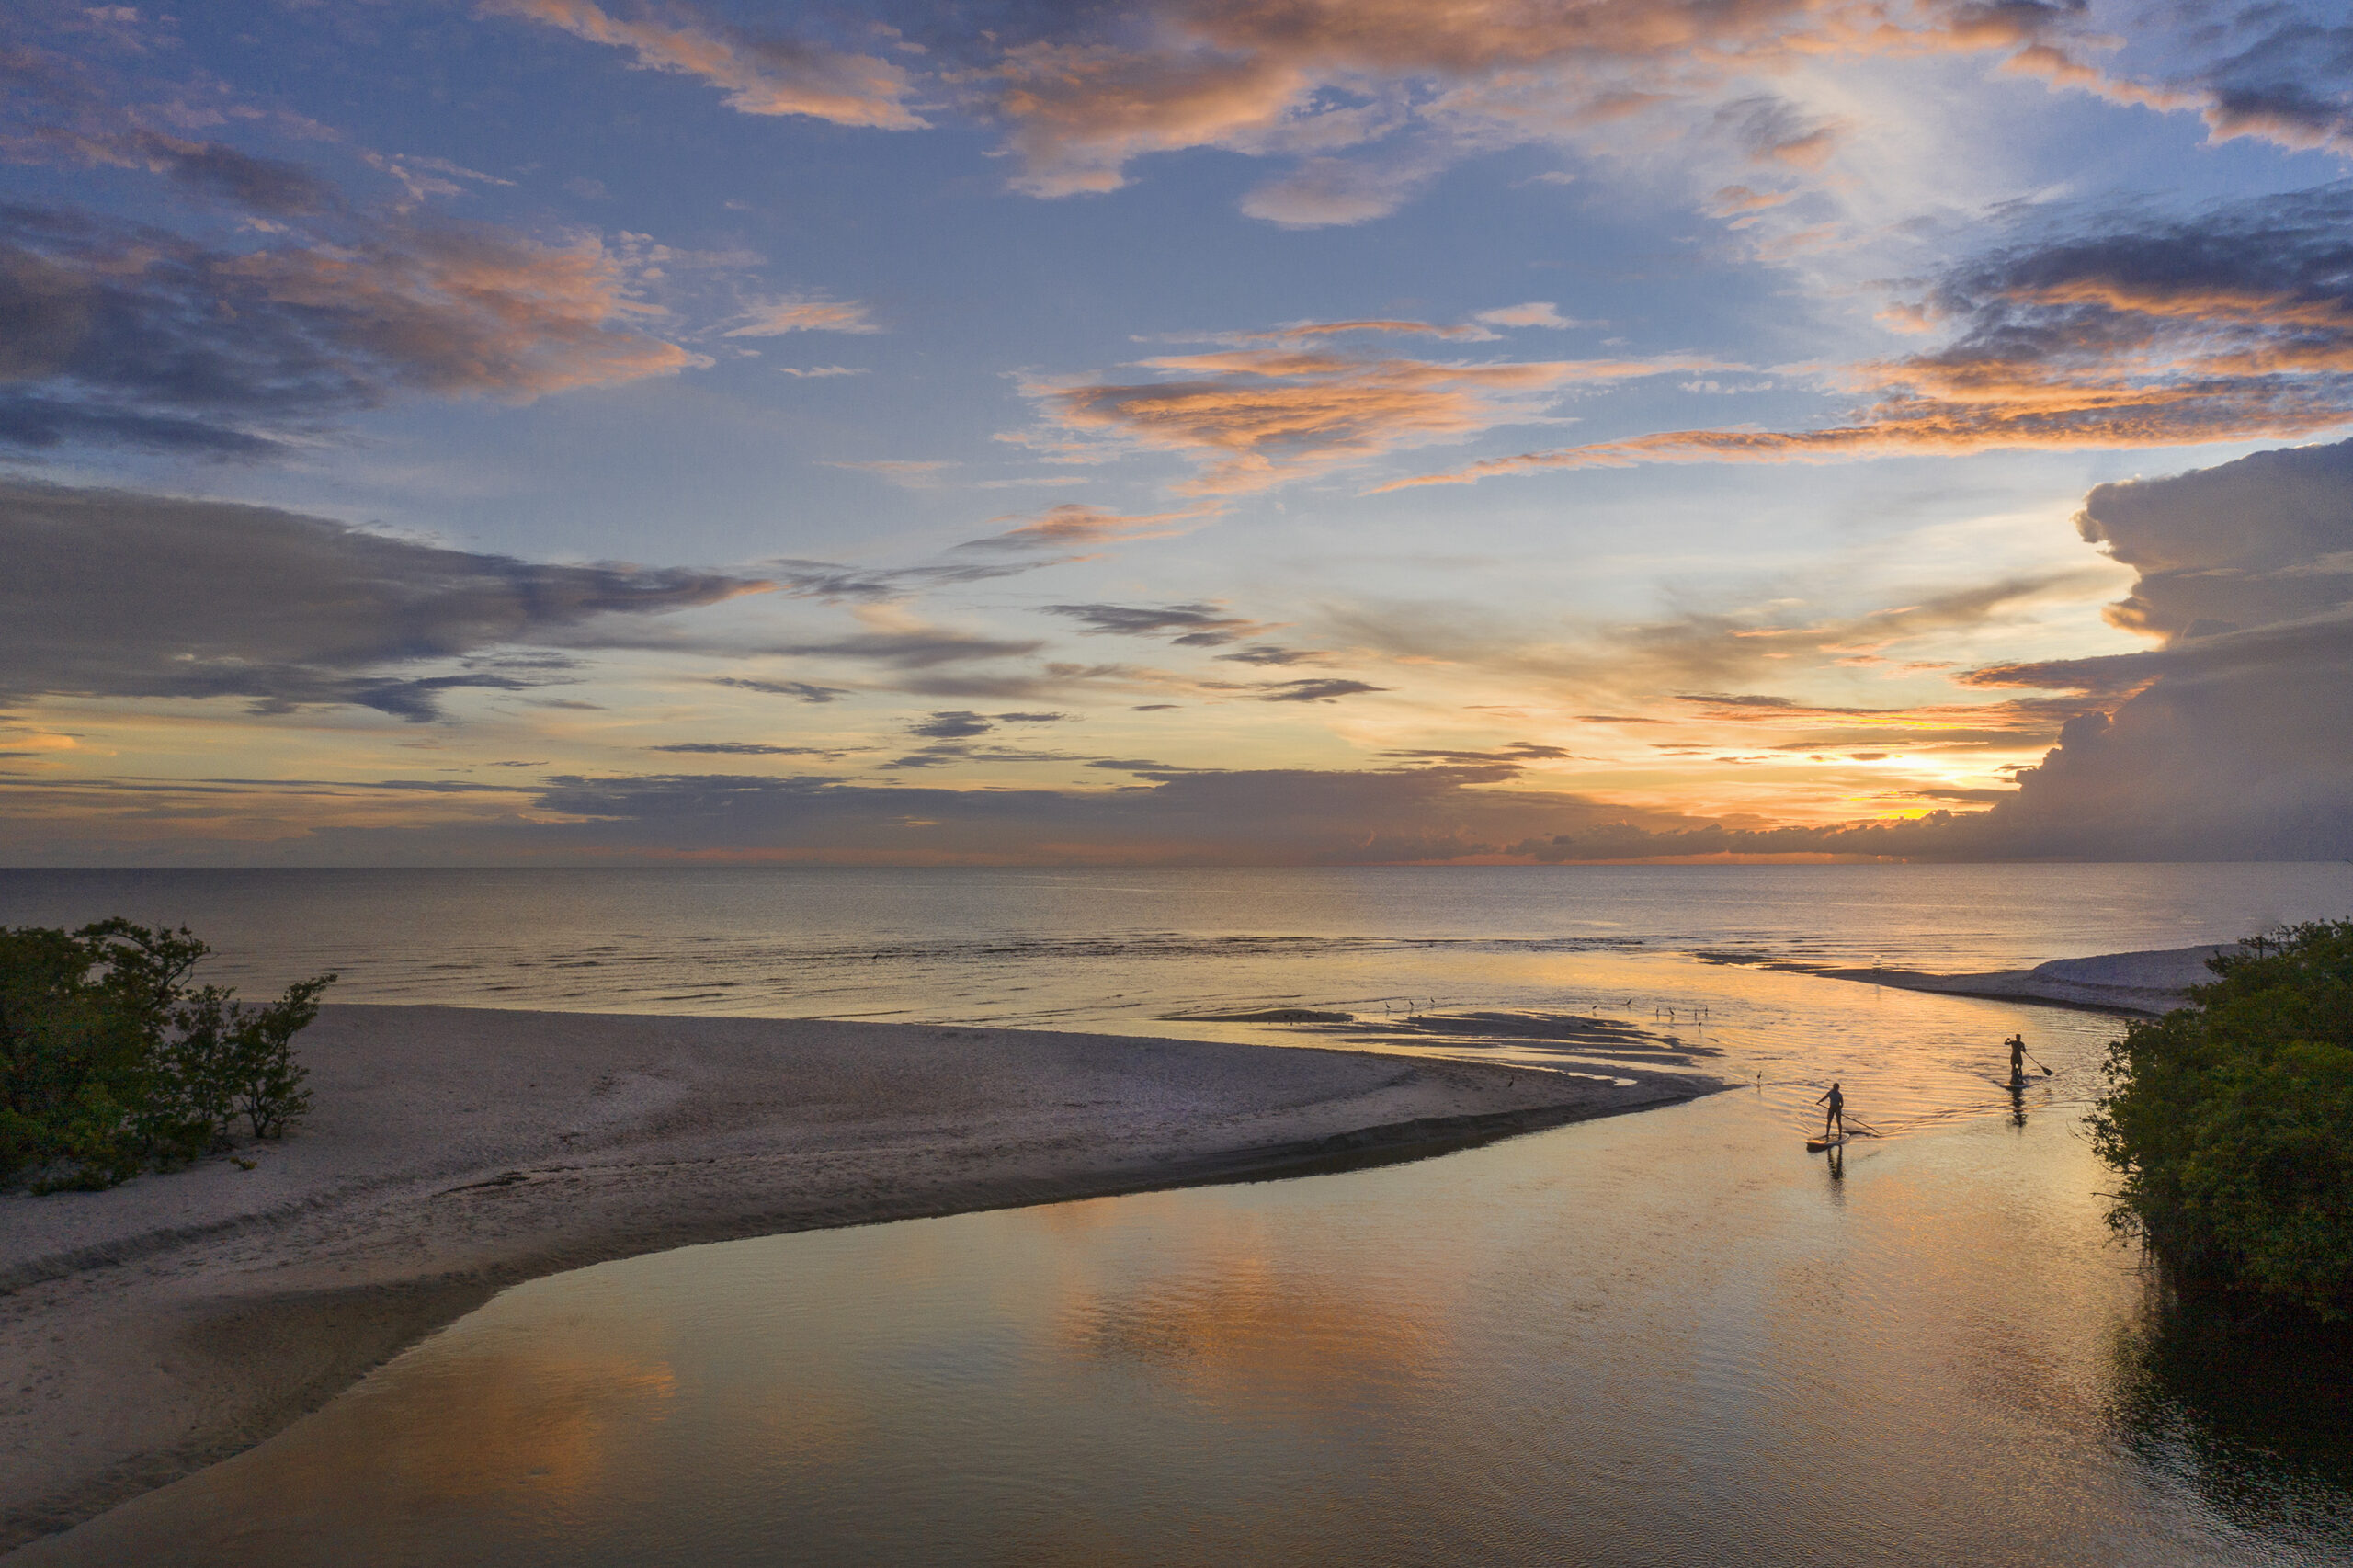 A couple make their way through Clam Pass against the backdrop of another beautiful Gulf sunset. Photo by Ed Chappell.